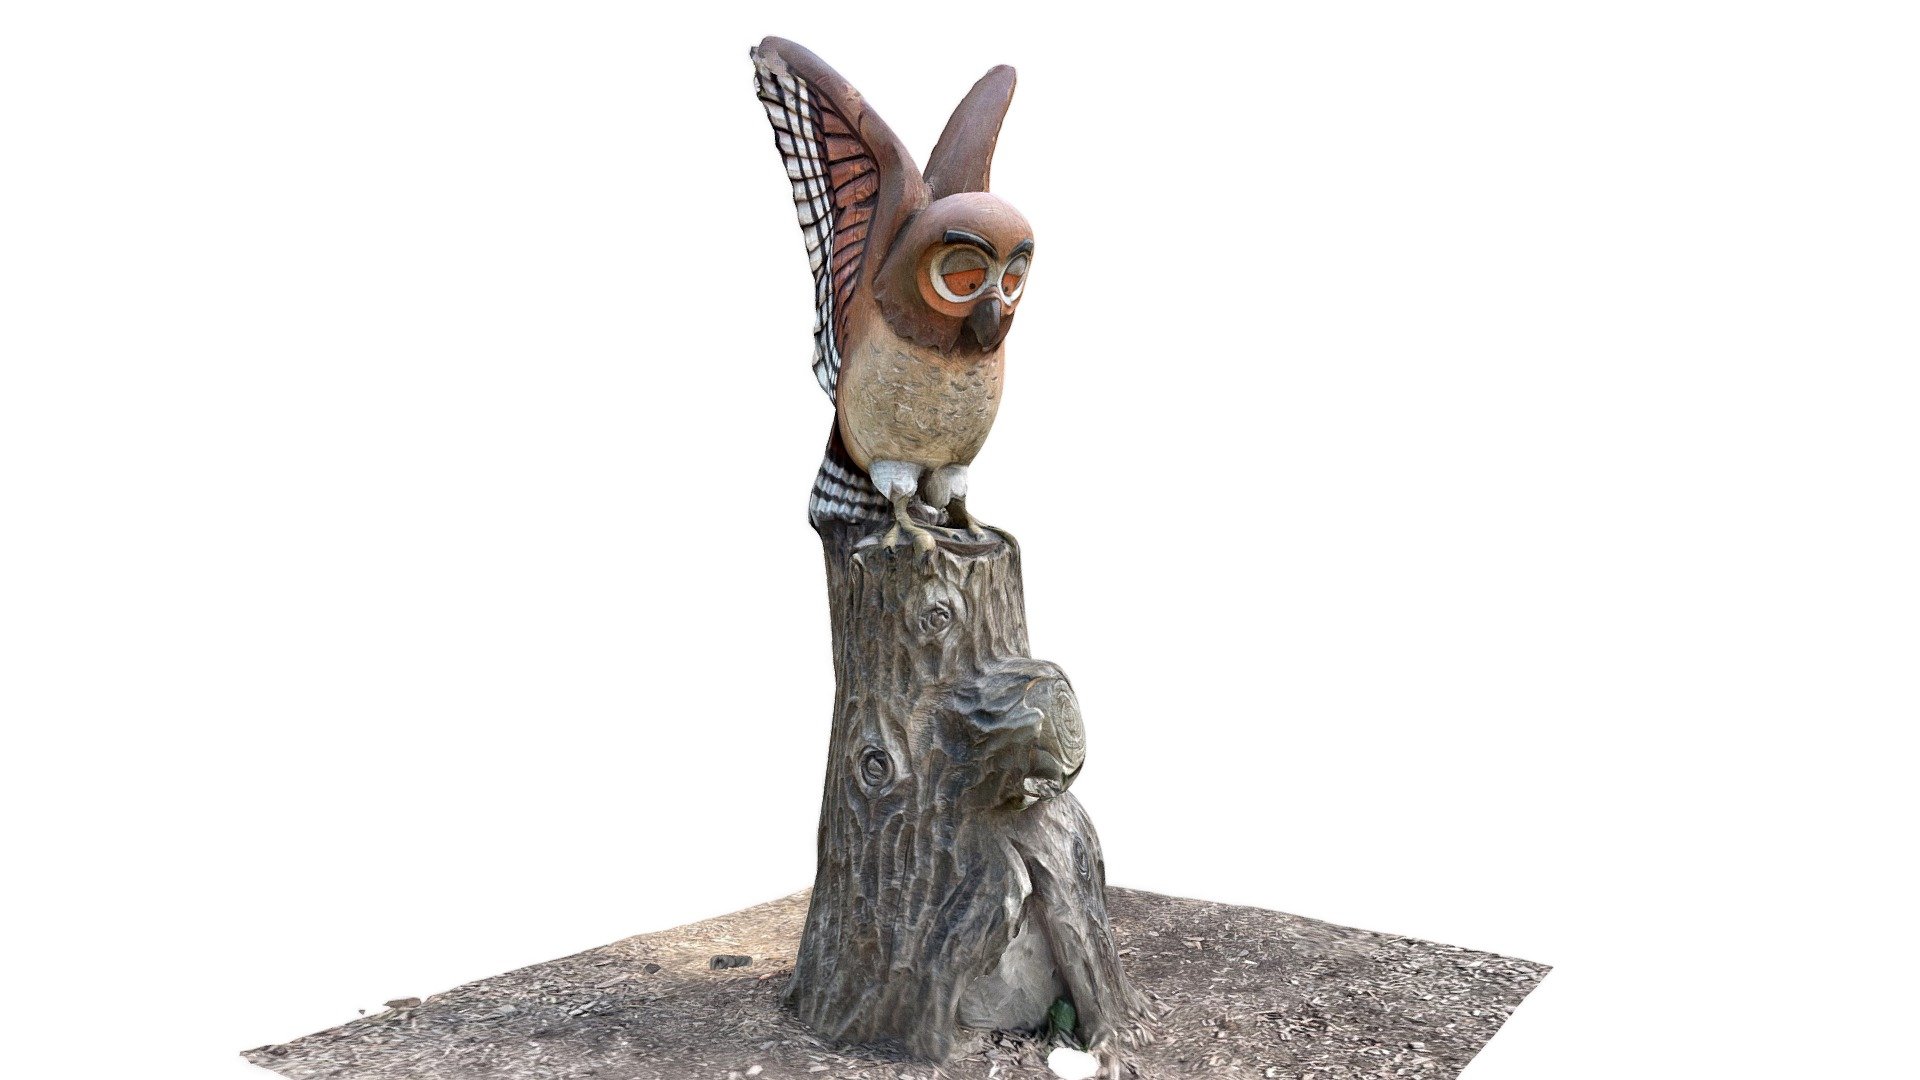 Gruffalo’s owl at Bedgebury Forest 

my 1scanaday is becoming 1scanaweek&hellip;

Captured with iPhone12 - The Owl - Download Free 3D model by manusainz 3d model